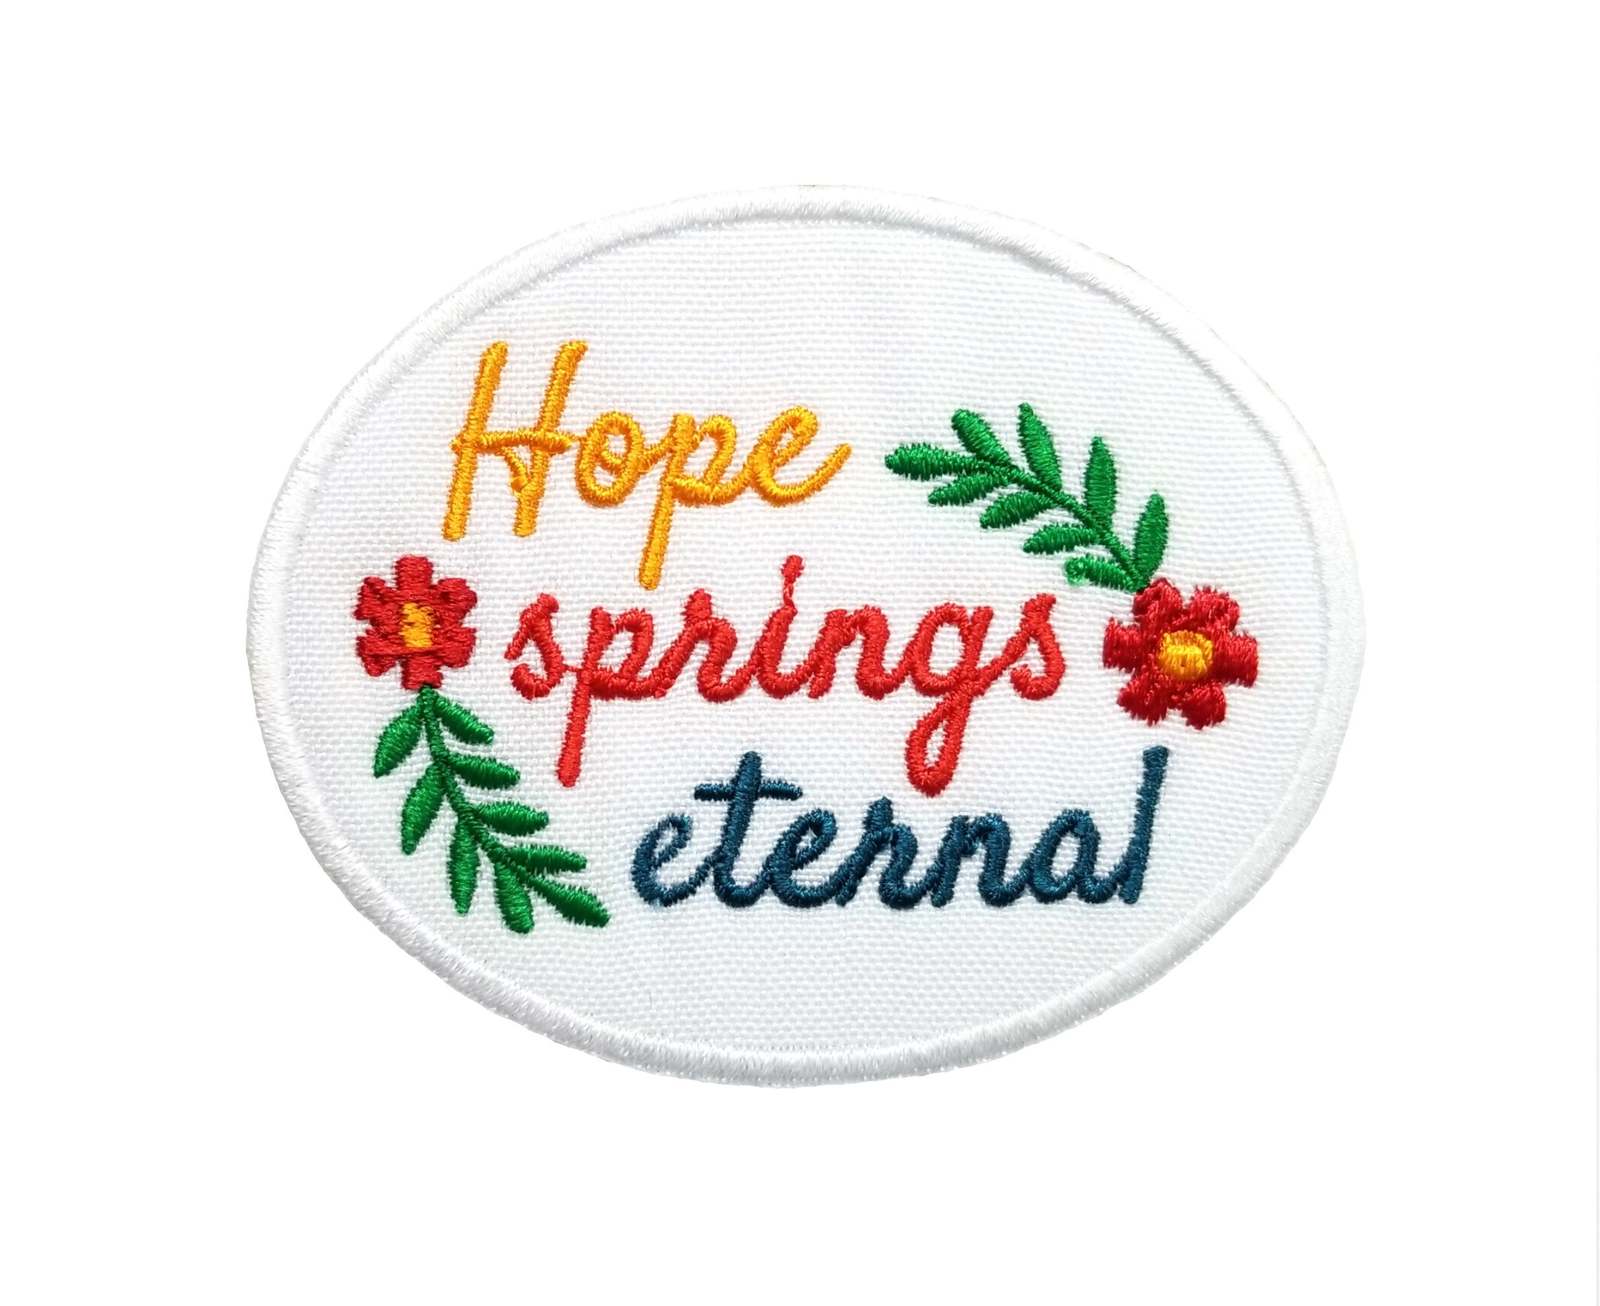 Springtime Quotes Hope Springs Eternal Embroidered Iron On Patch 3" x 2.4" - $5.87